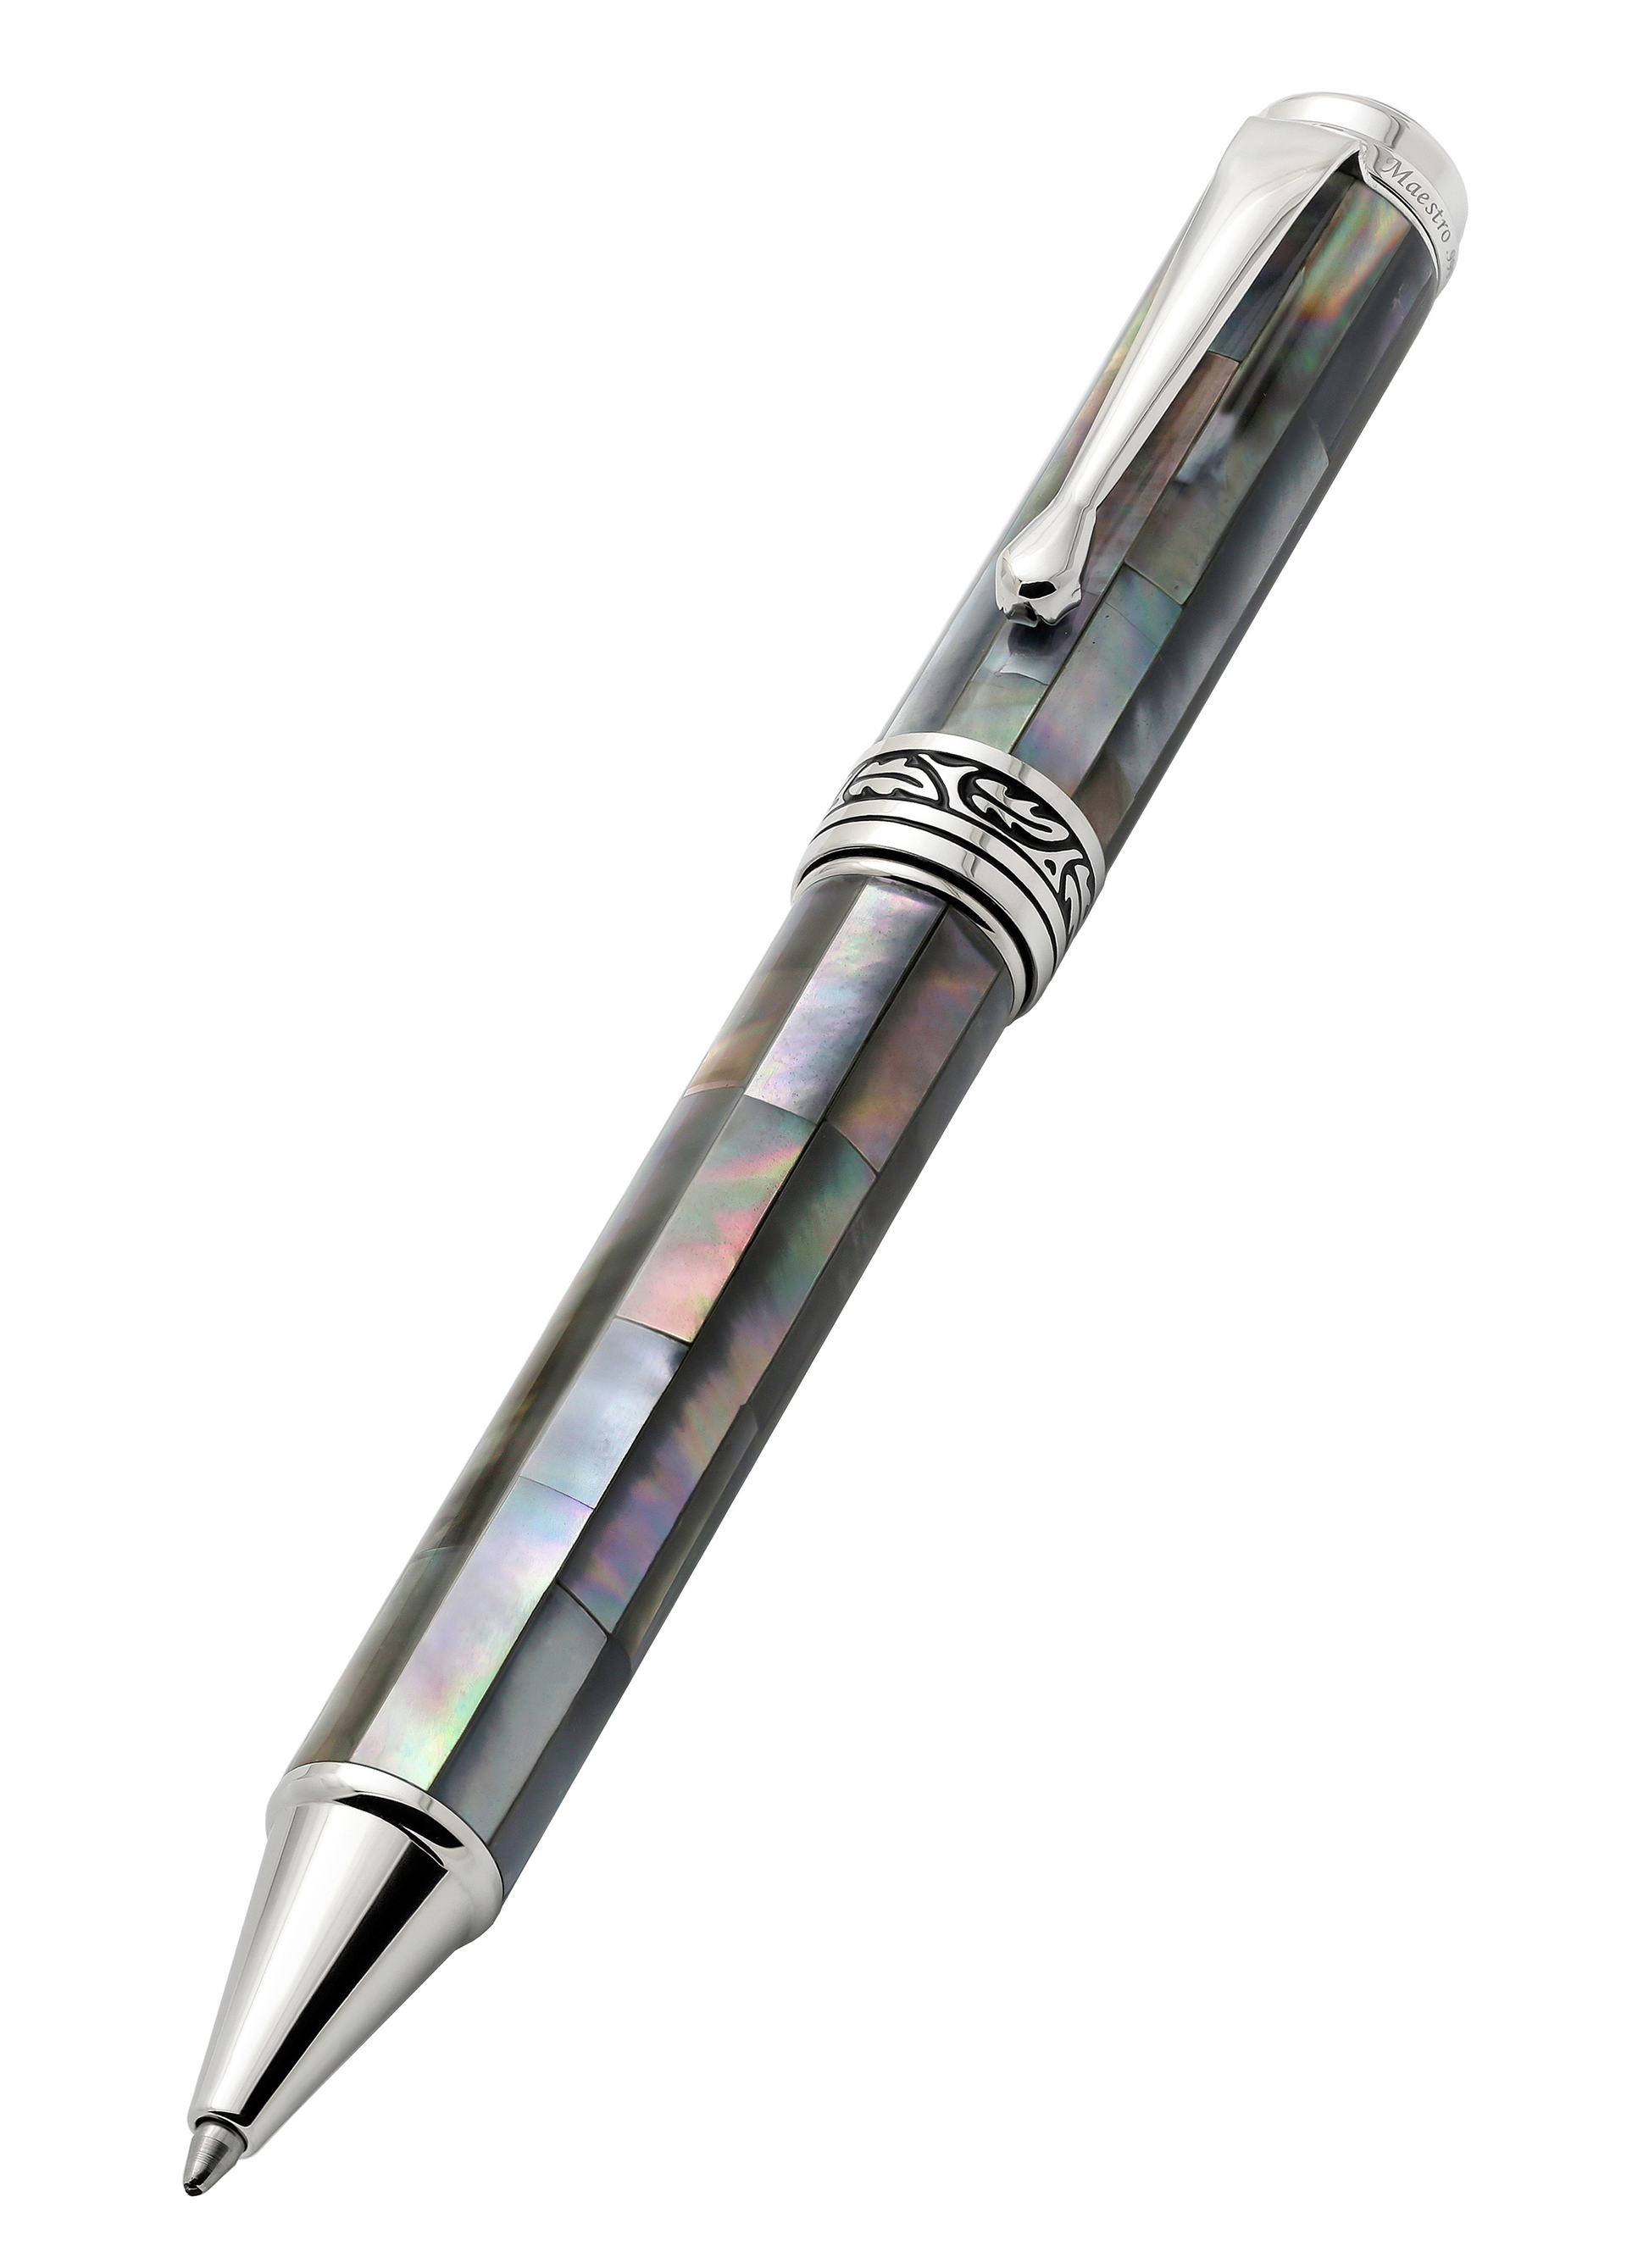 Xezo - Angled 3D view of the Maestro Black Mother of Pearl B ballpoint pen